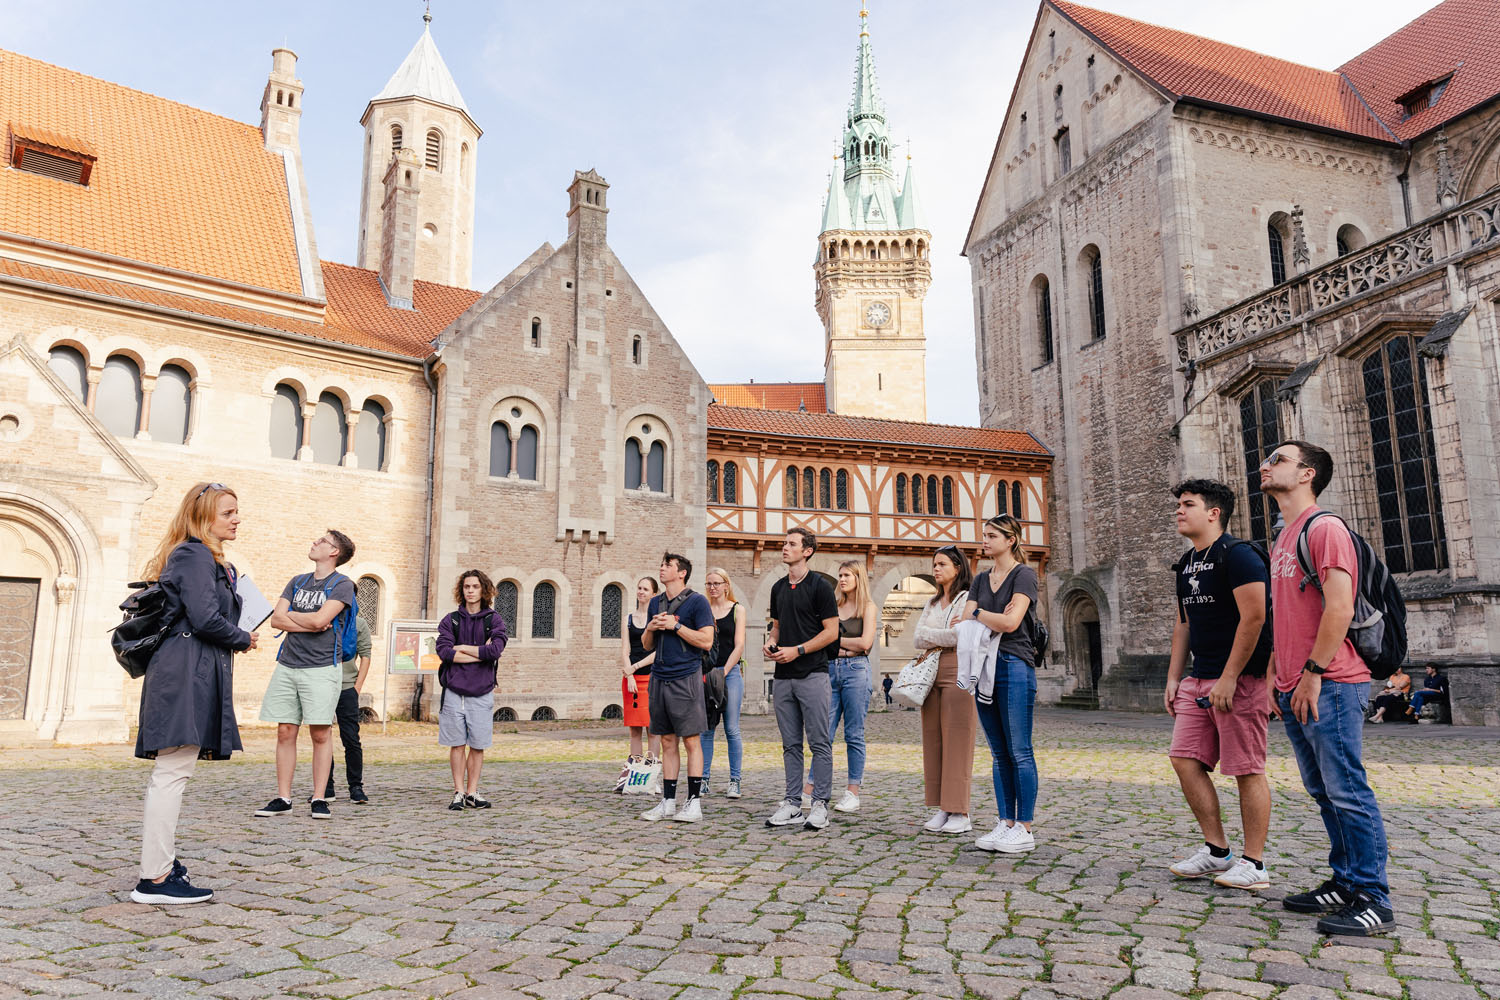 Students during a city tour in the historic city center of Braunschweig